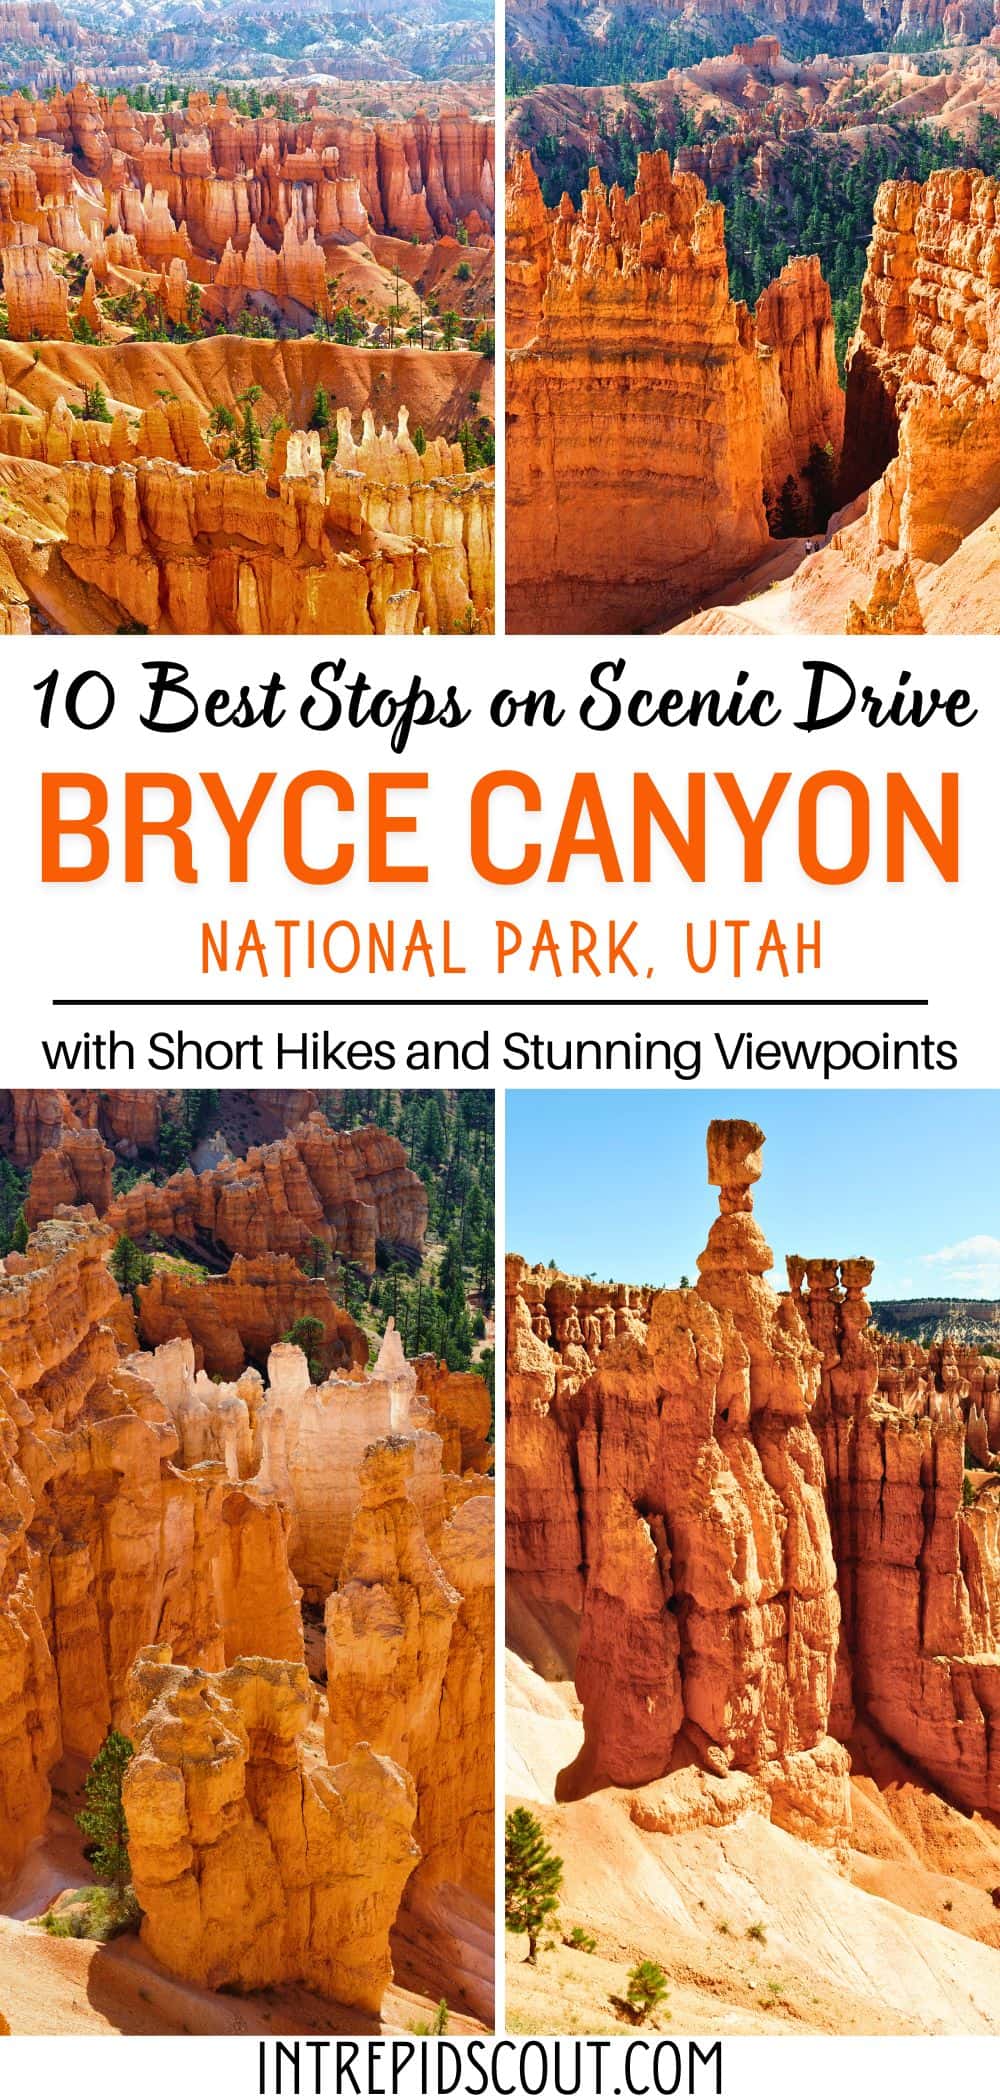 Best Stops on Bryce Canyon Scenic Drive